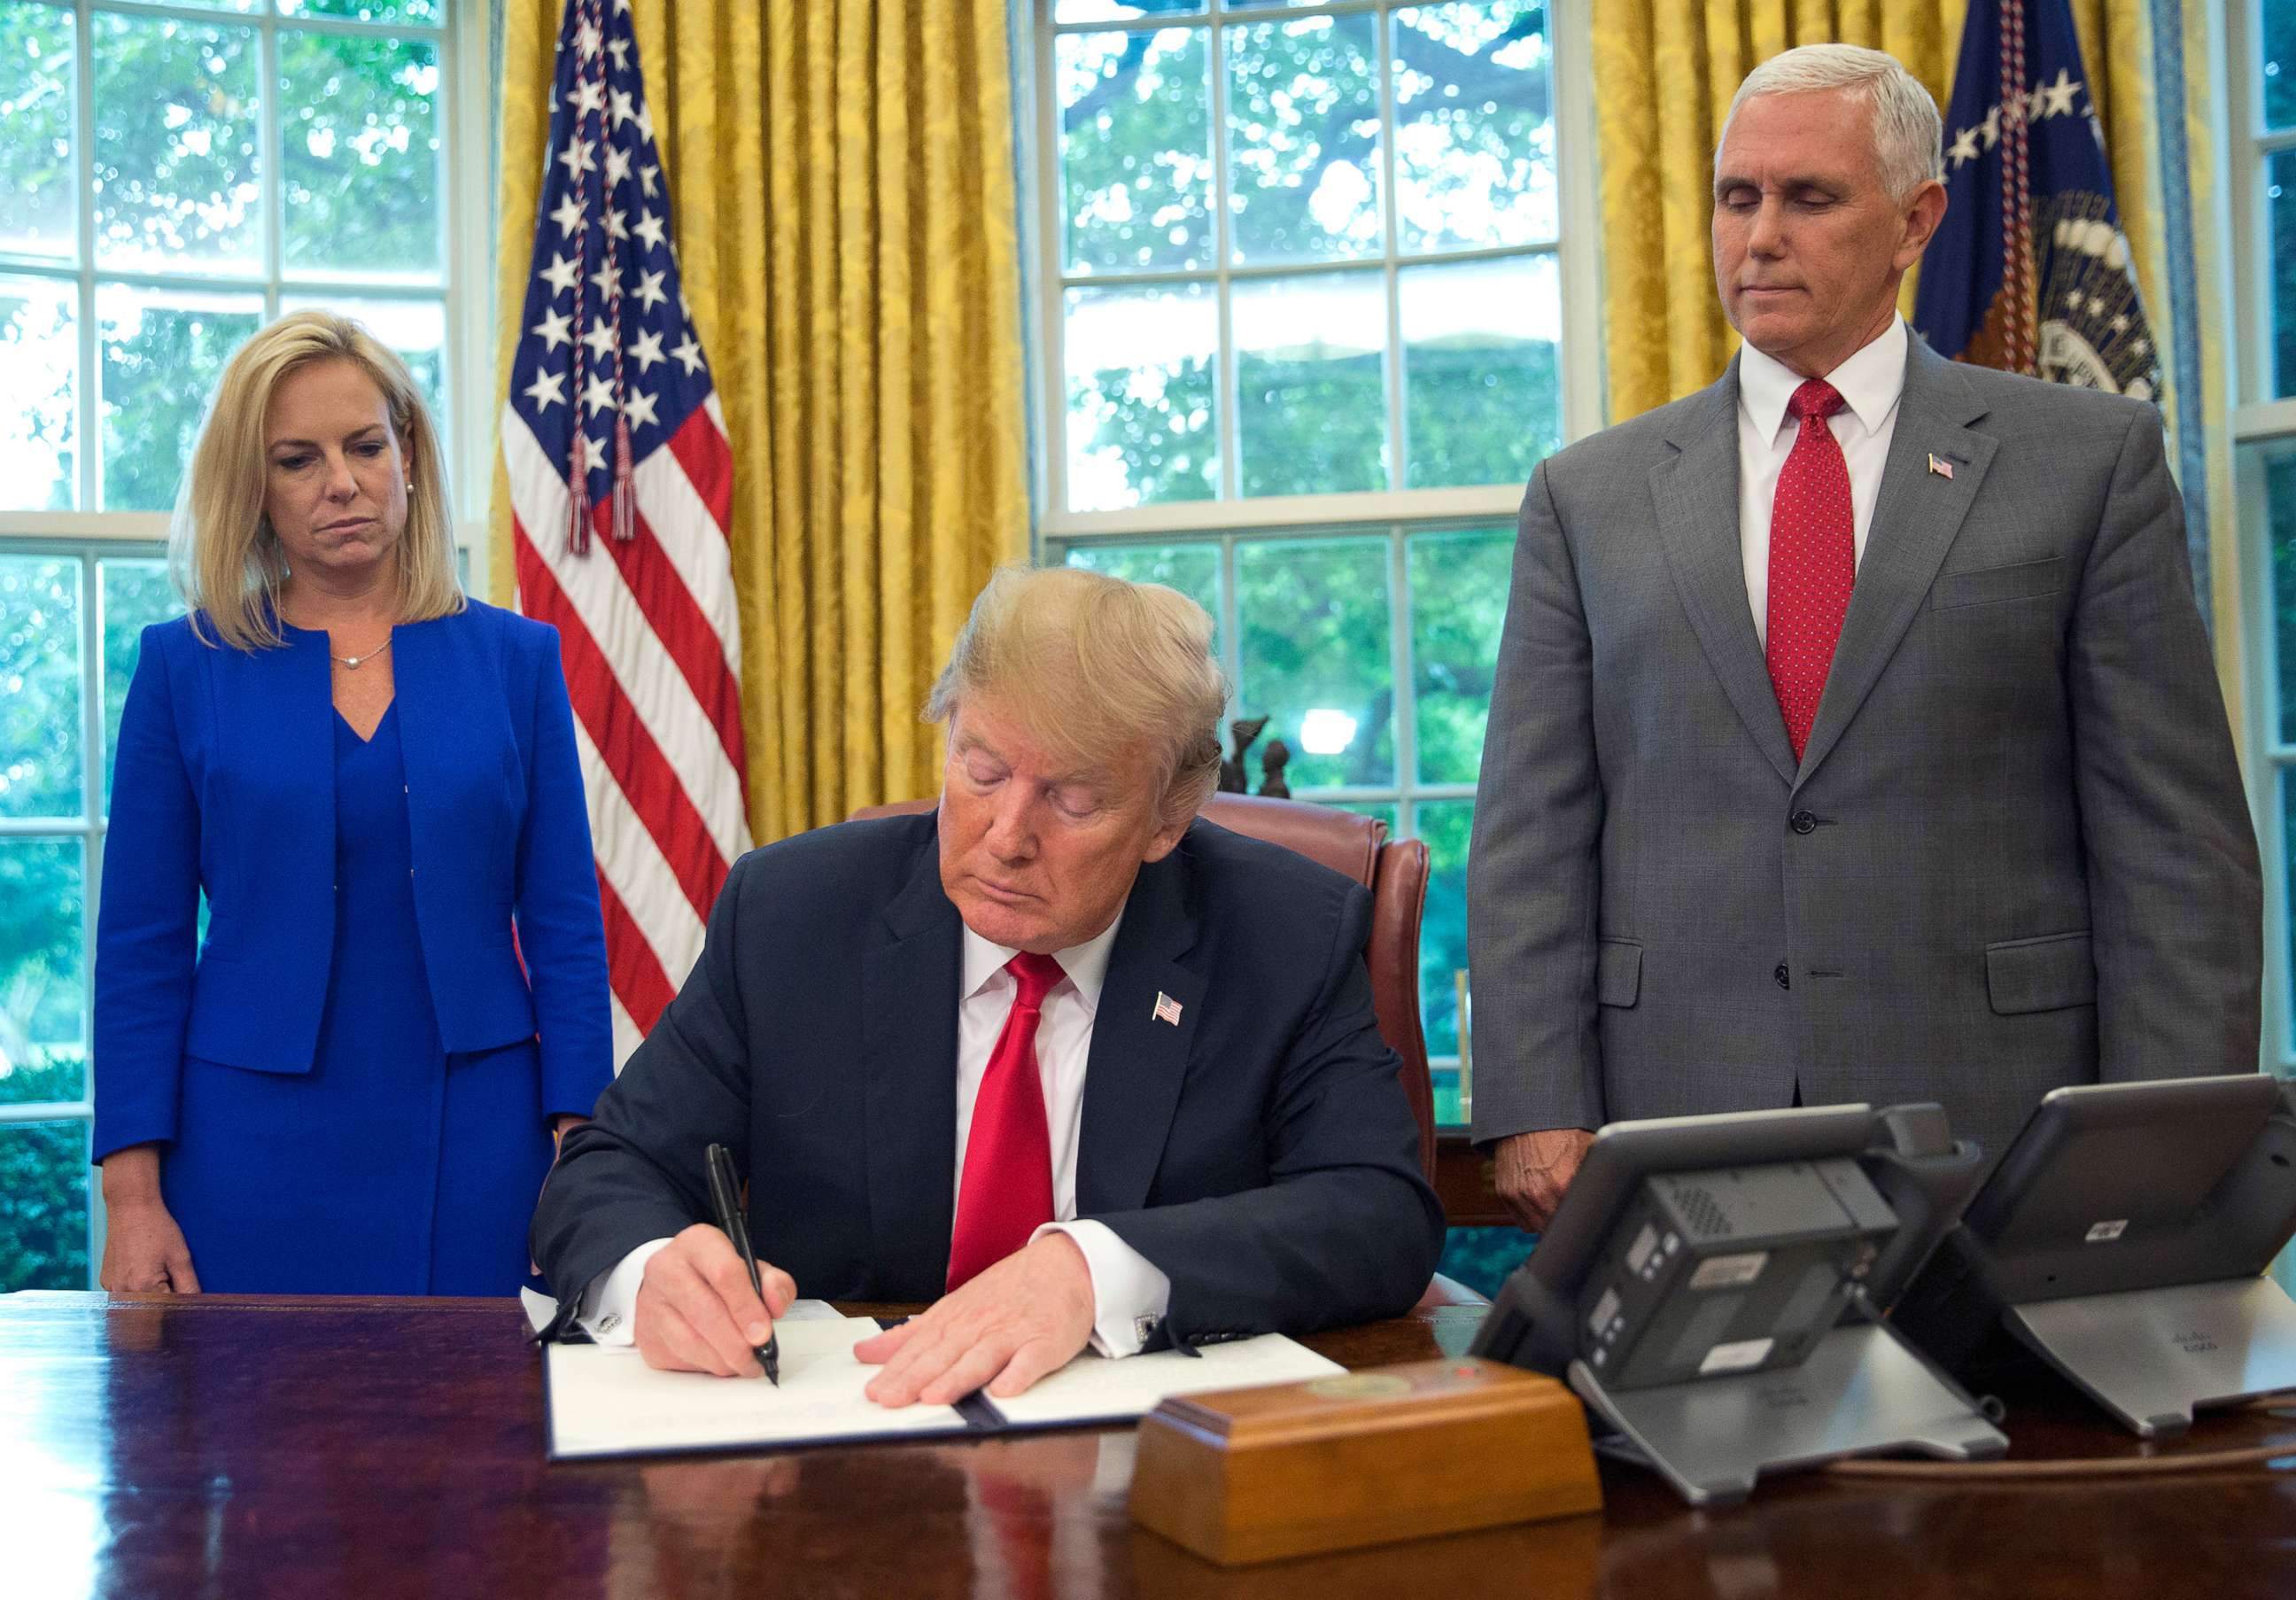 PHOTO: President Donald Trump signs an executive order to keep families together at the border during an event in the Oval Office of the White House in Washington, June 20, 2018.